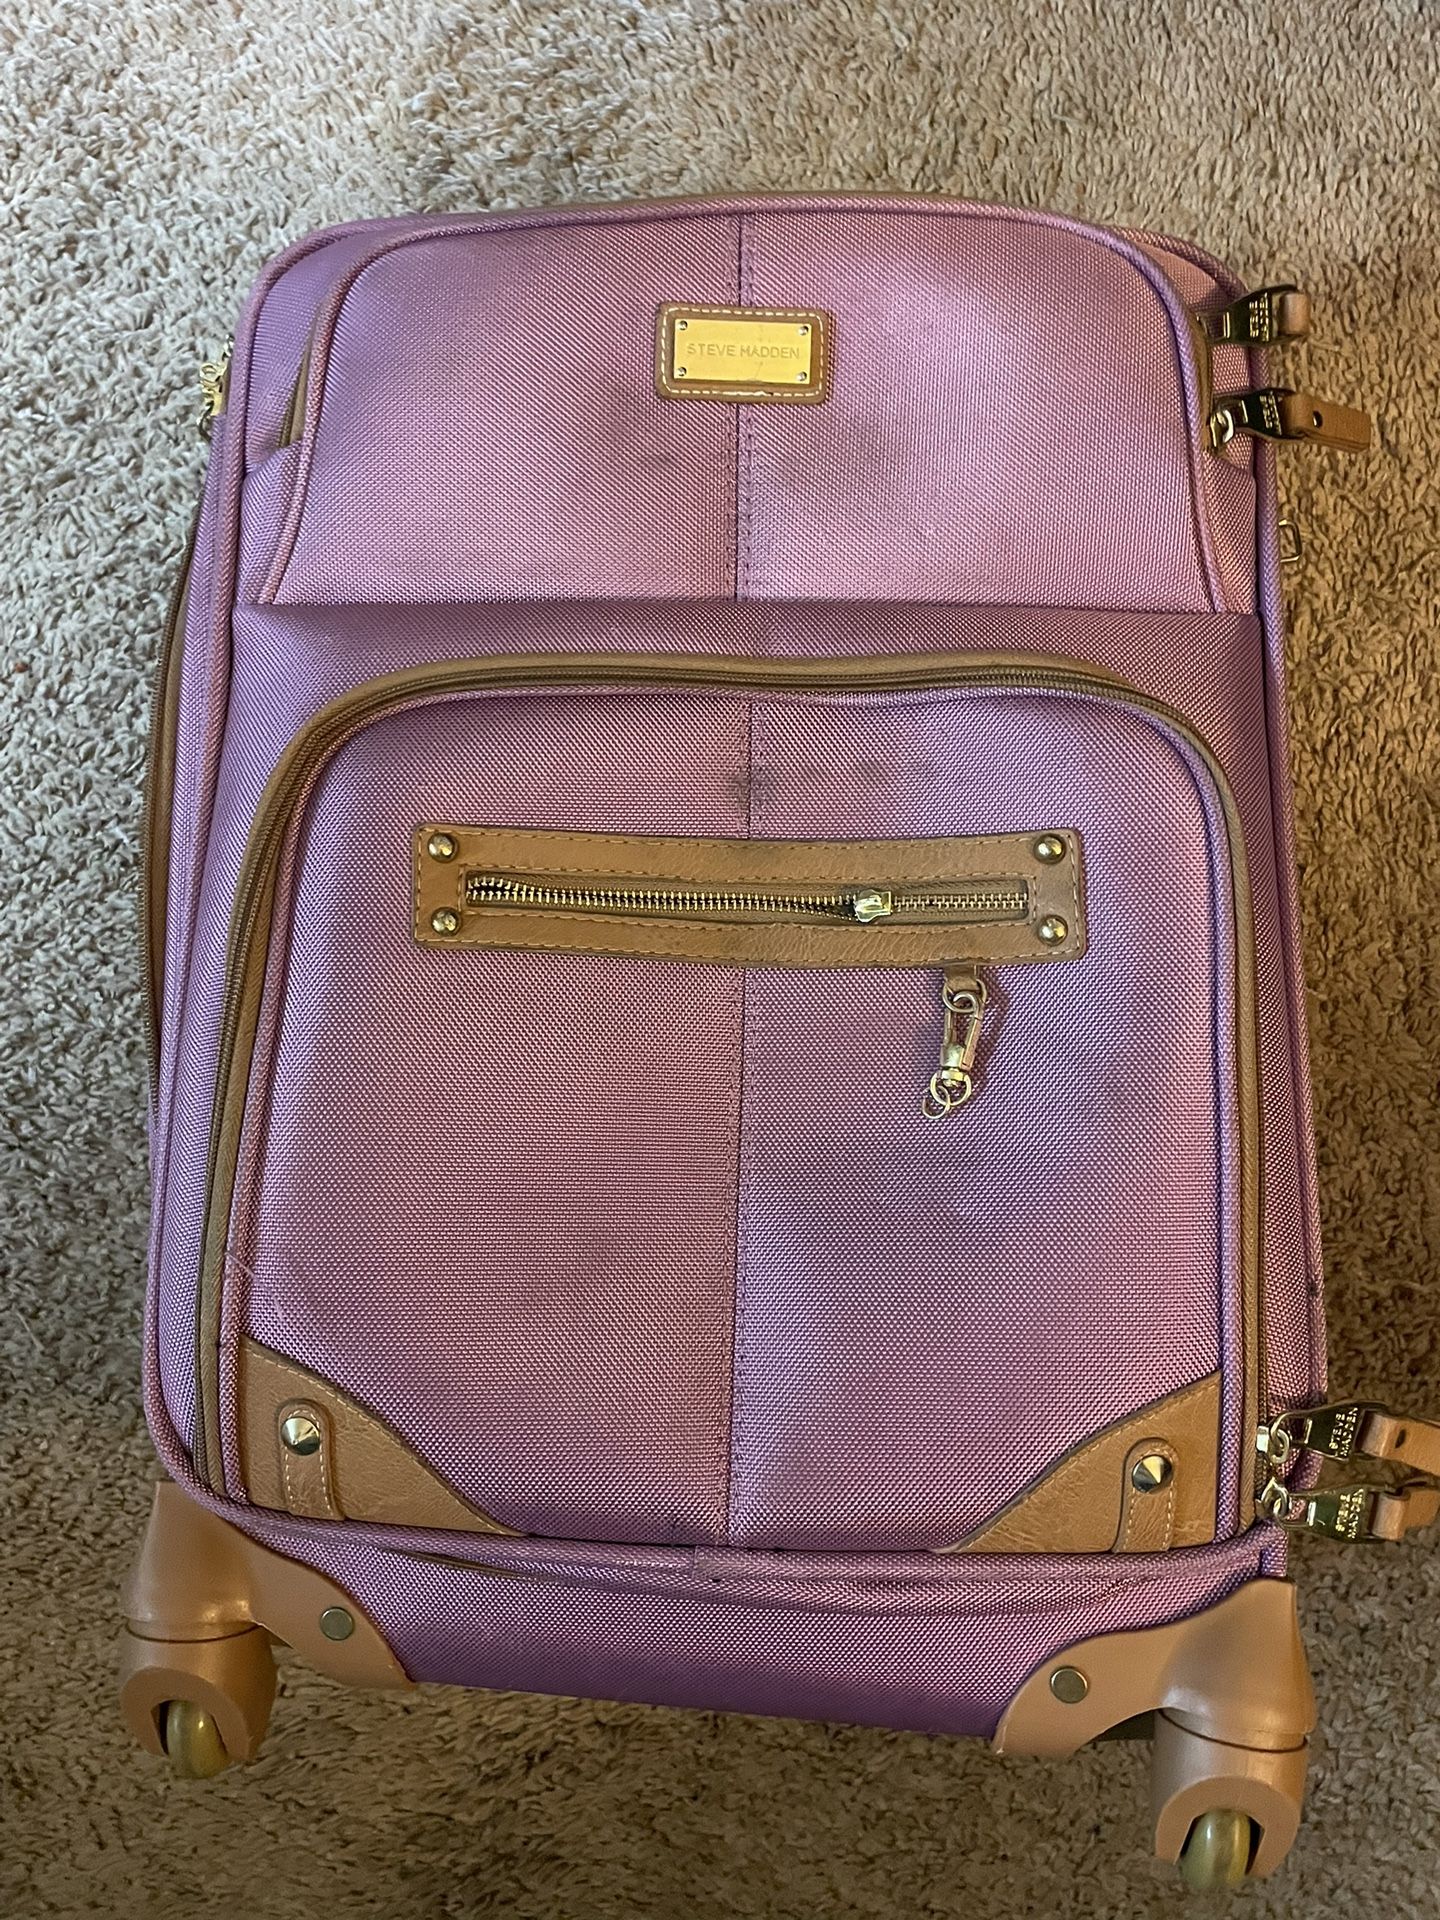 Purple/Pink Small Carry On Suitcase 